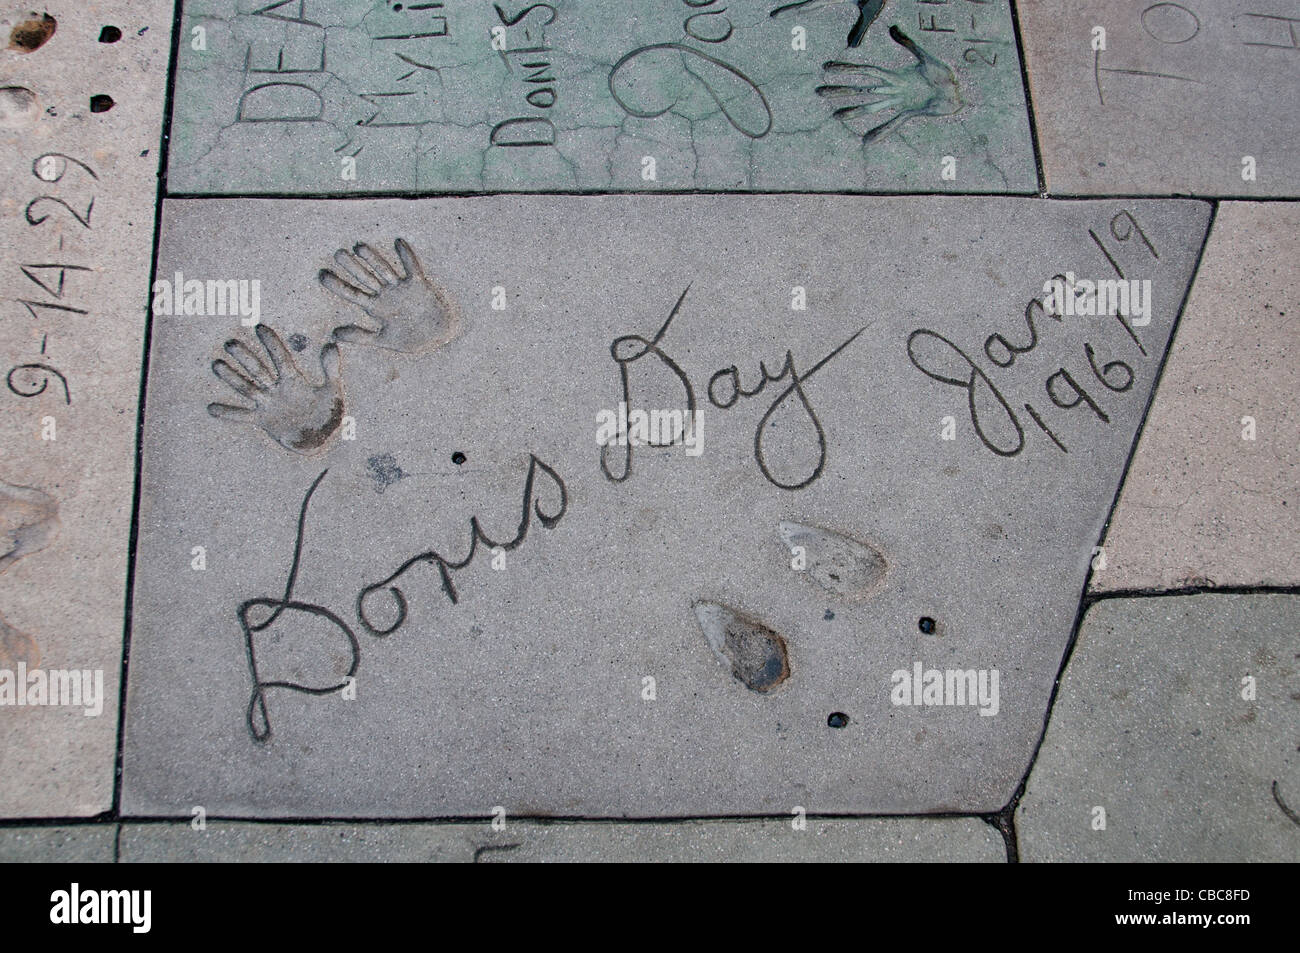 Doris Tag Hand Fuß Drucke Pflasterung Chinese Theater in Hollywood Boulevard in Los Angeles Stockfoto